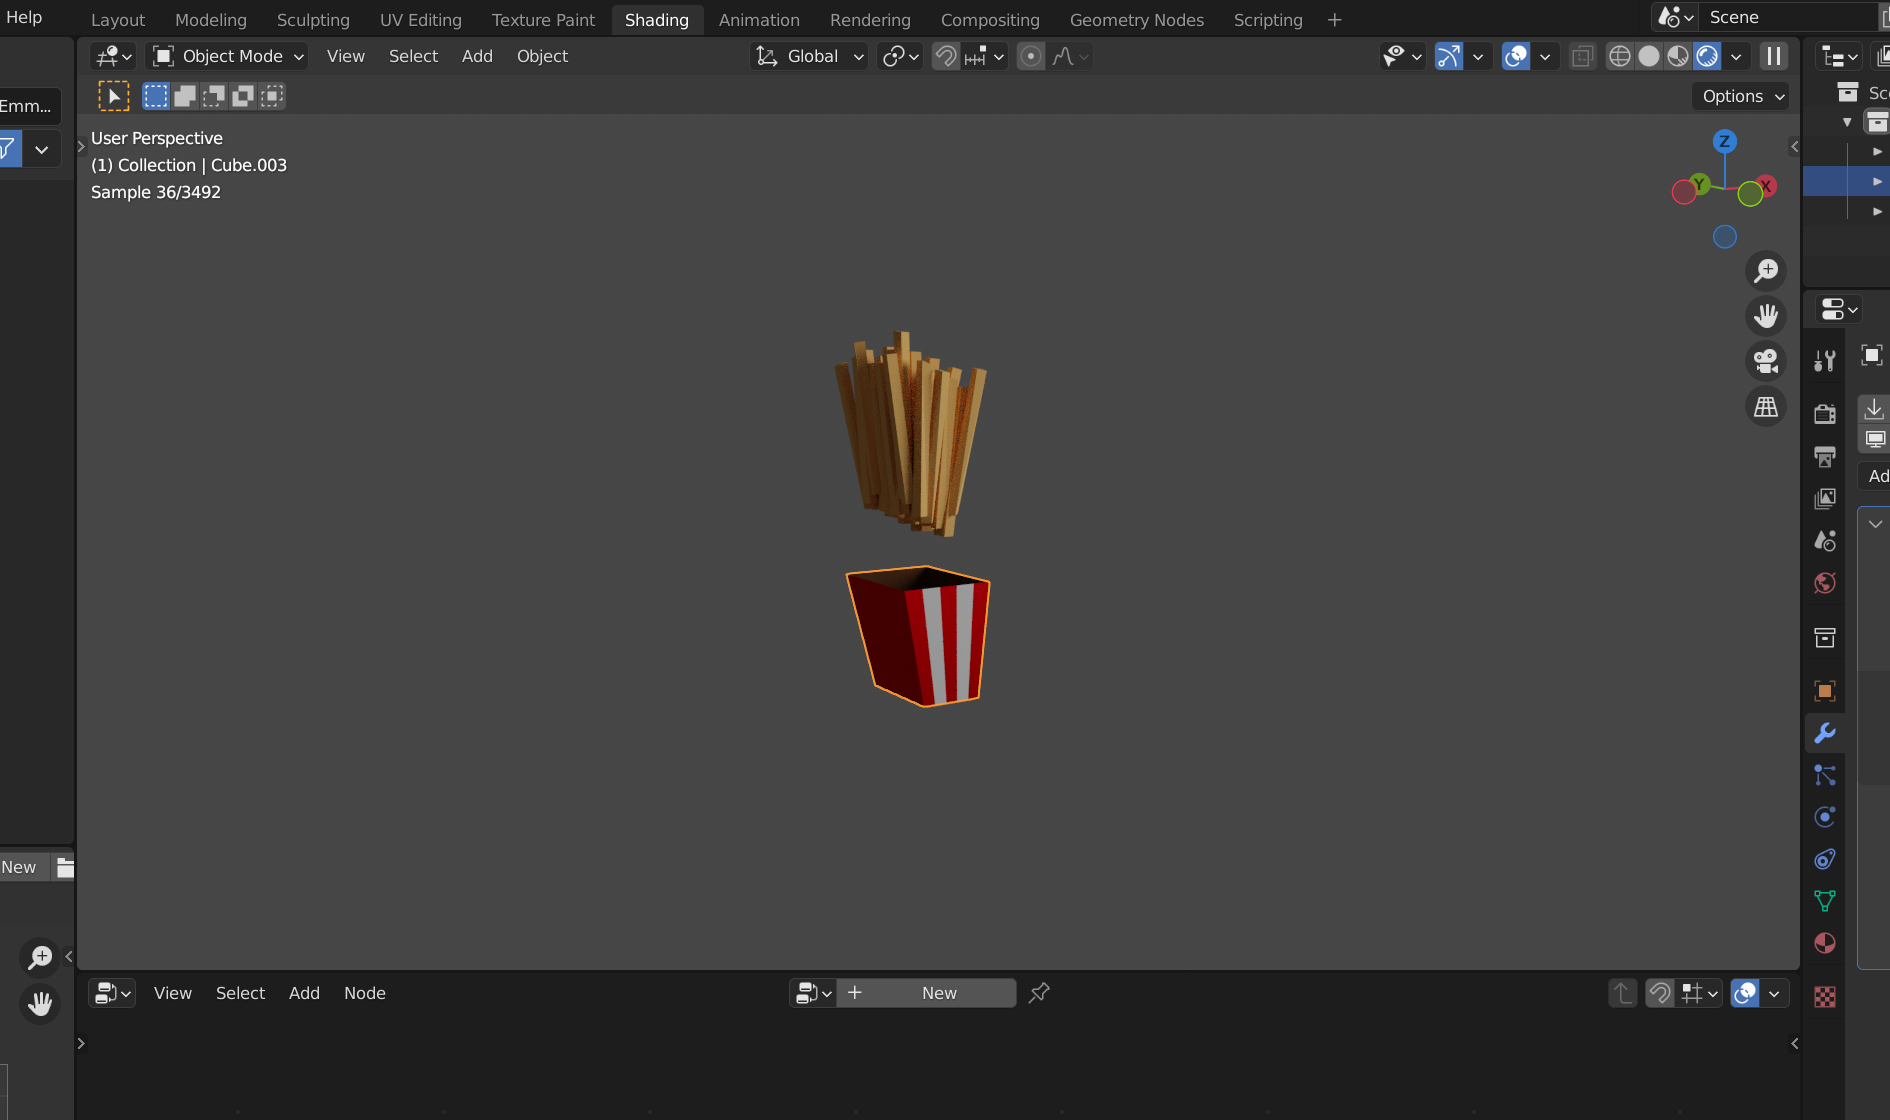 Some French fries, created with Blender.